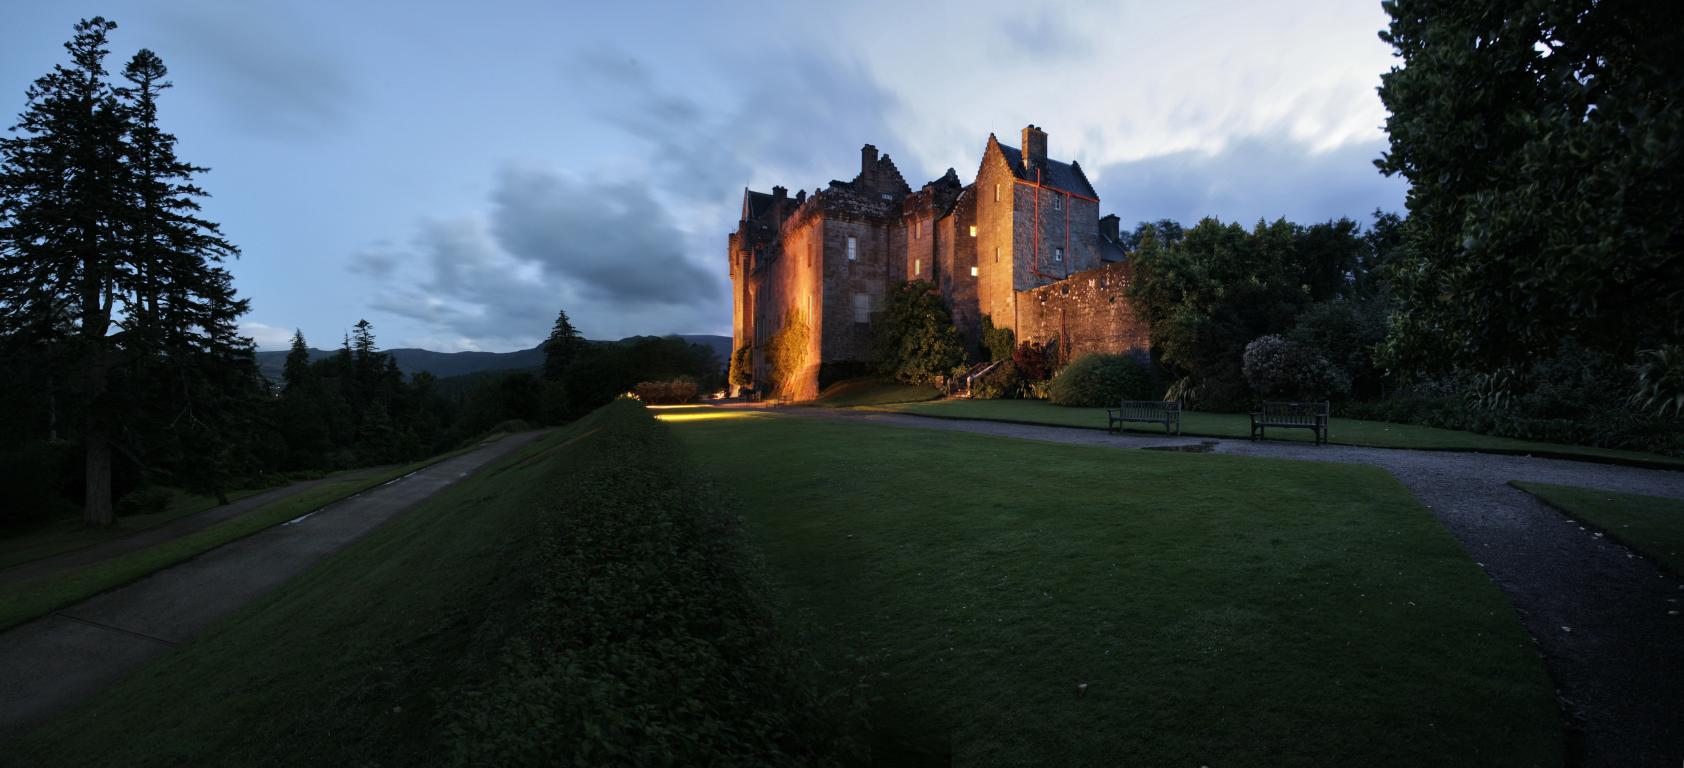 Brodick Castle in the Evening, Isle of Arran (Credit: VisitScotland/Paul Tomkins)